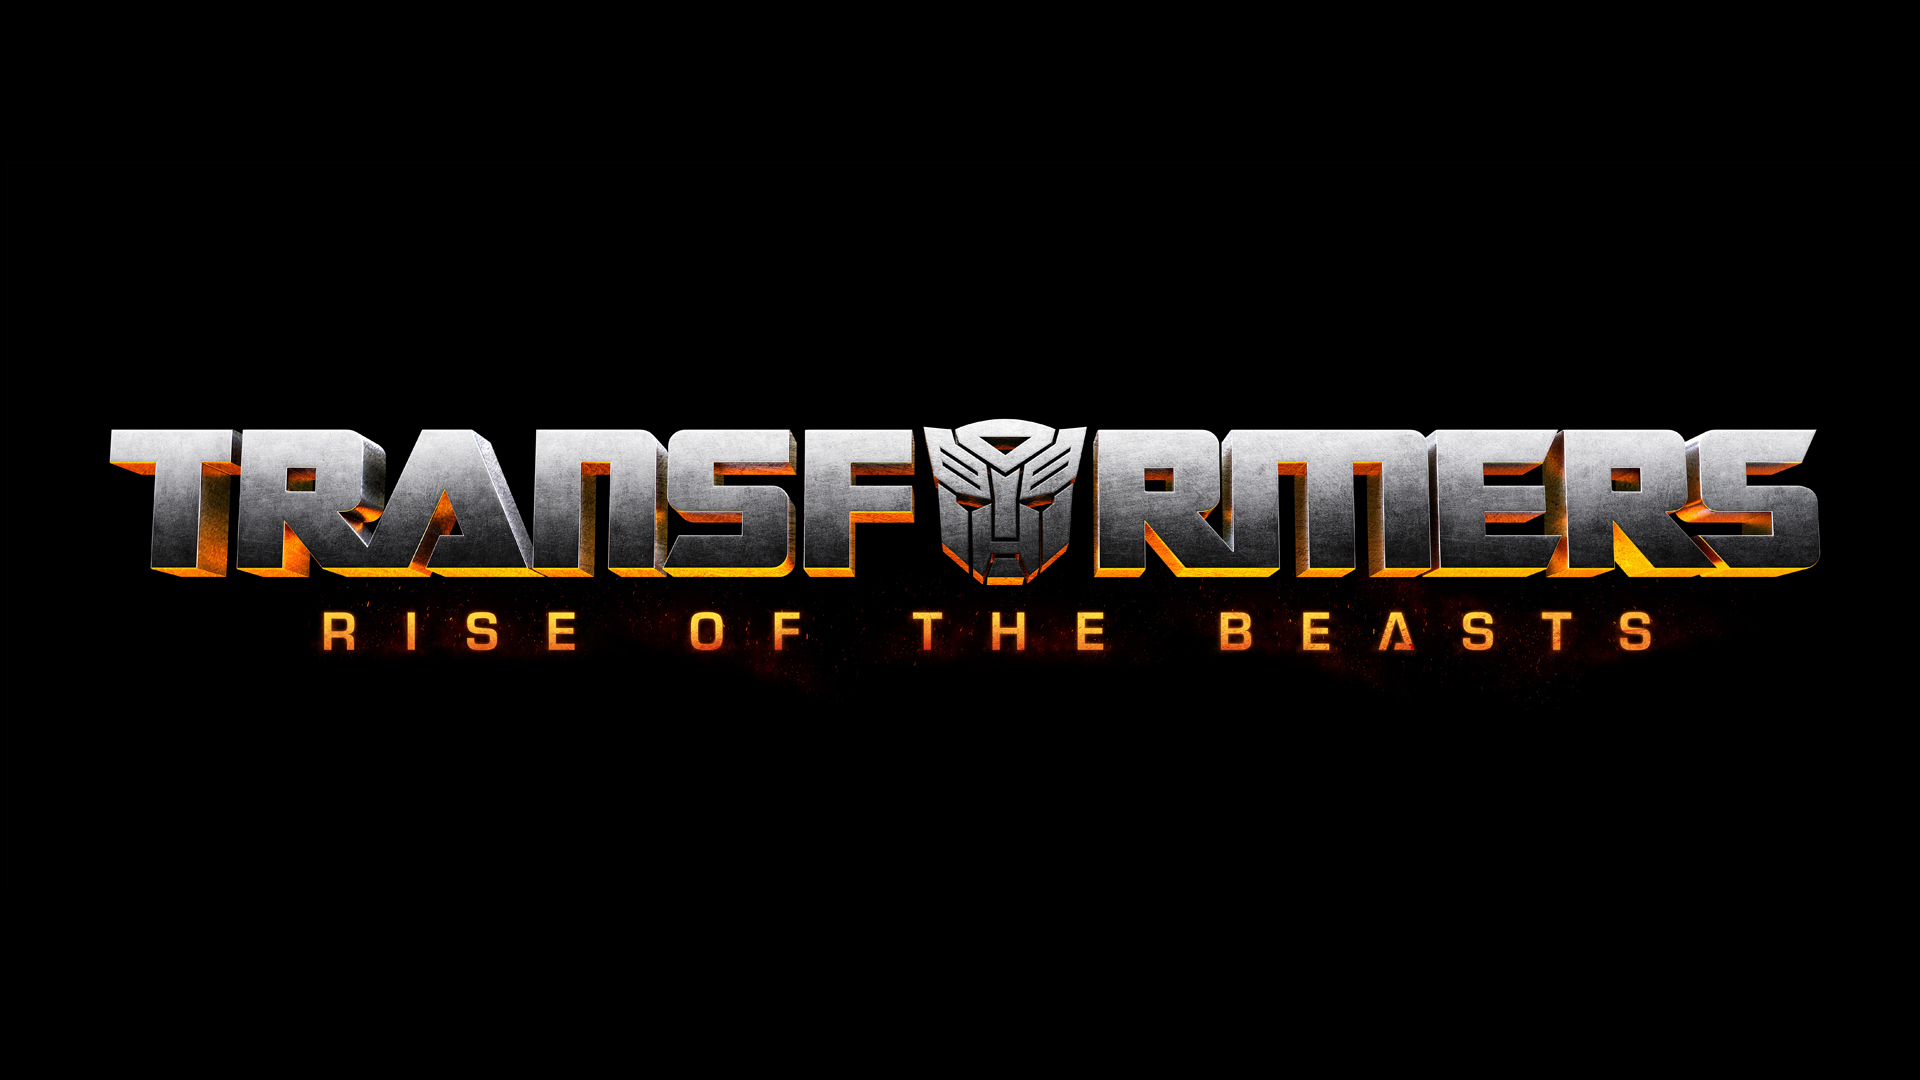 Transformers: Rise of the Beasts - movie still